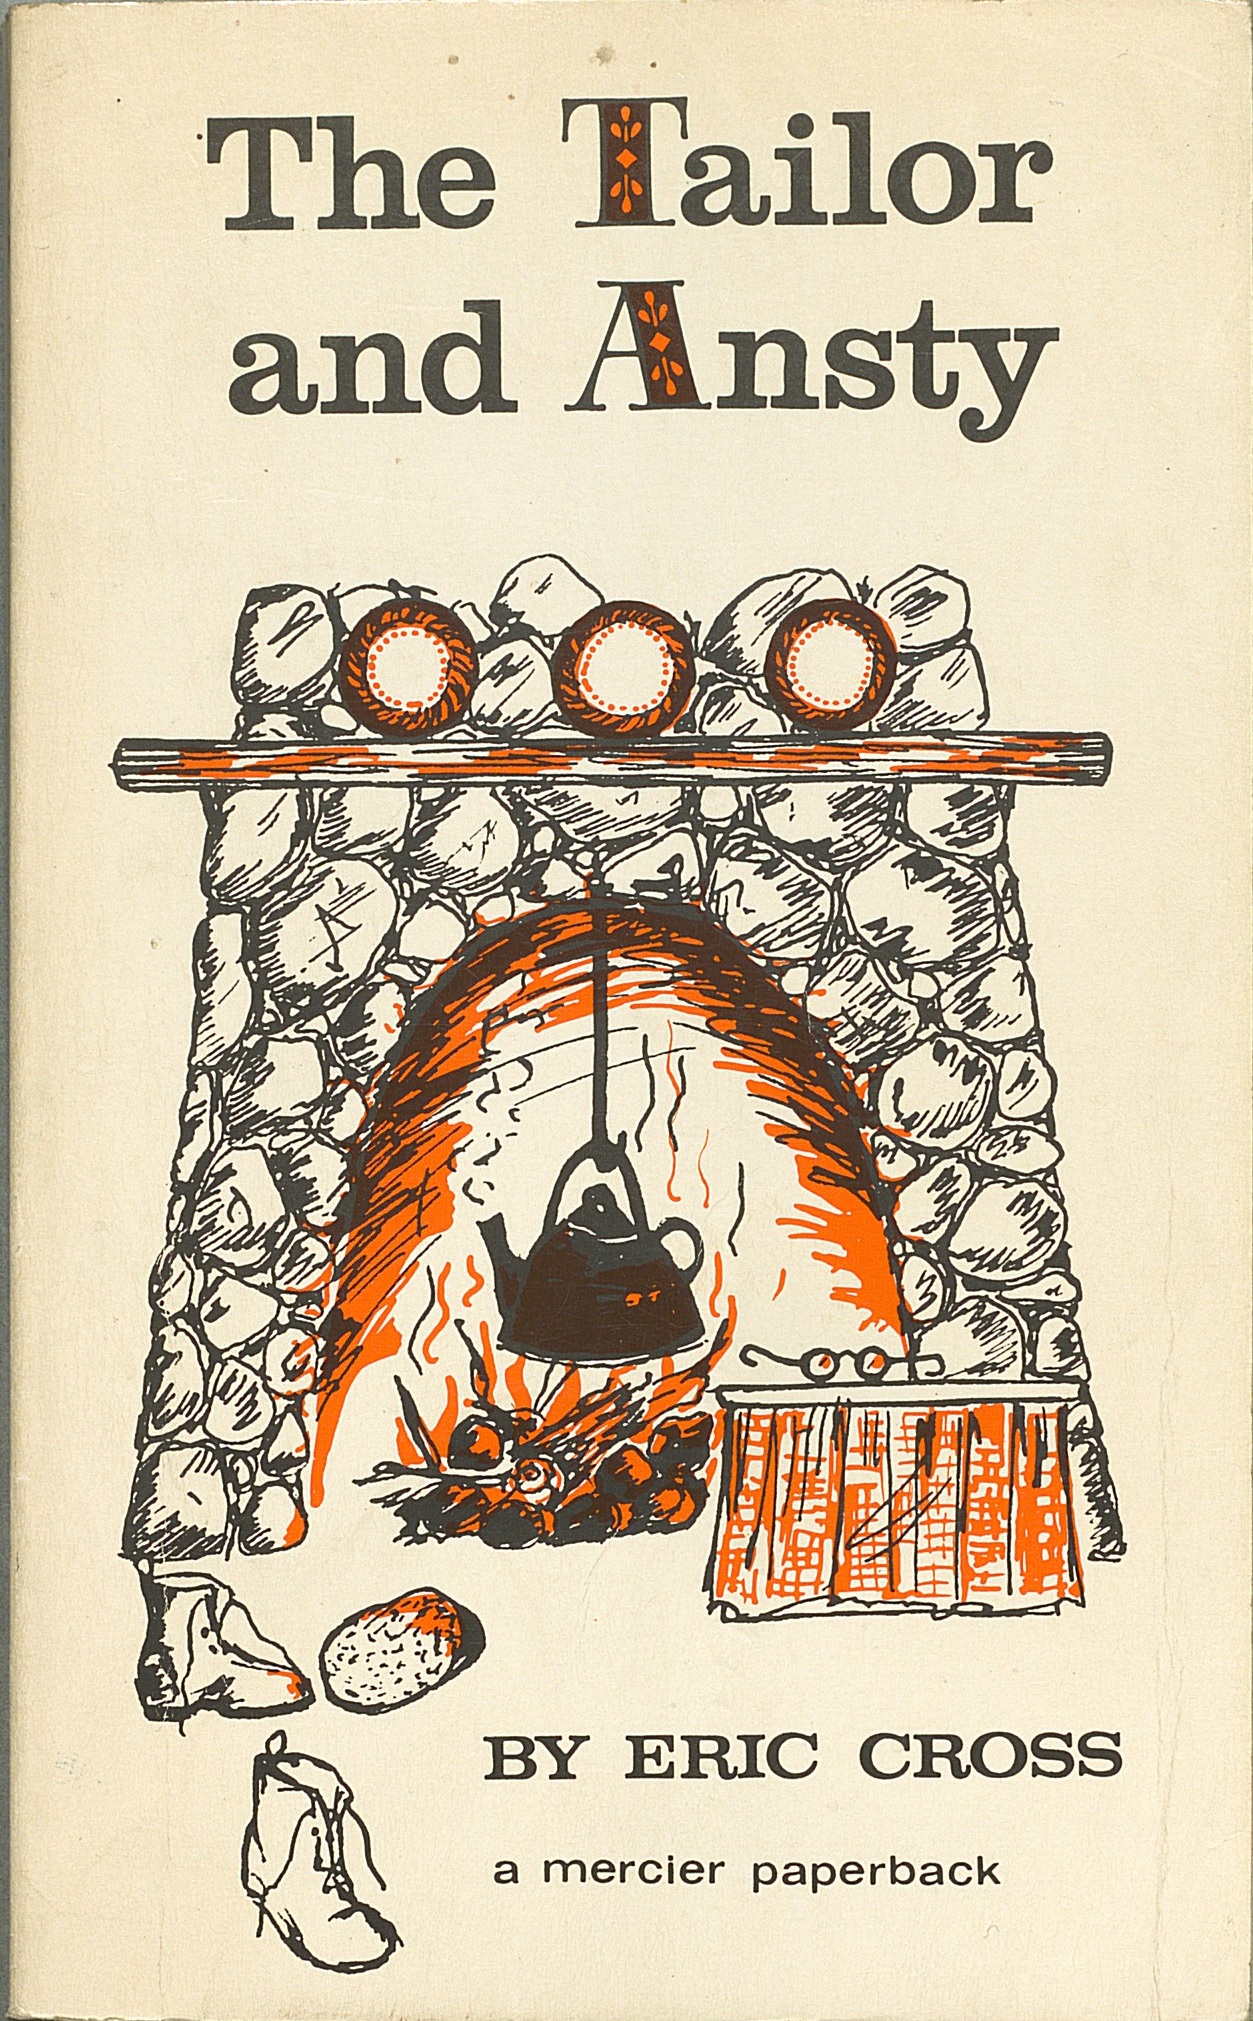 Cover to the 1970 paperback edition. There is a kettle hung over the fire in the hearth. In front of the fireplace is a pair of glasses on a small table on the right and on the left there is a pair of boots.